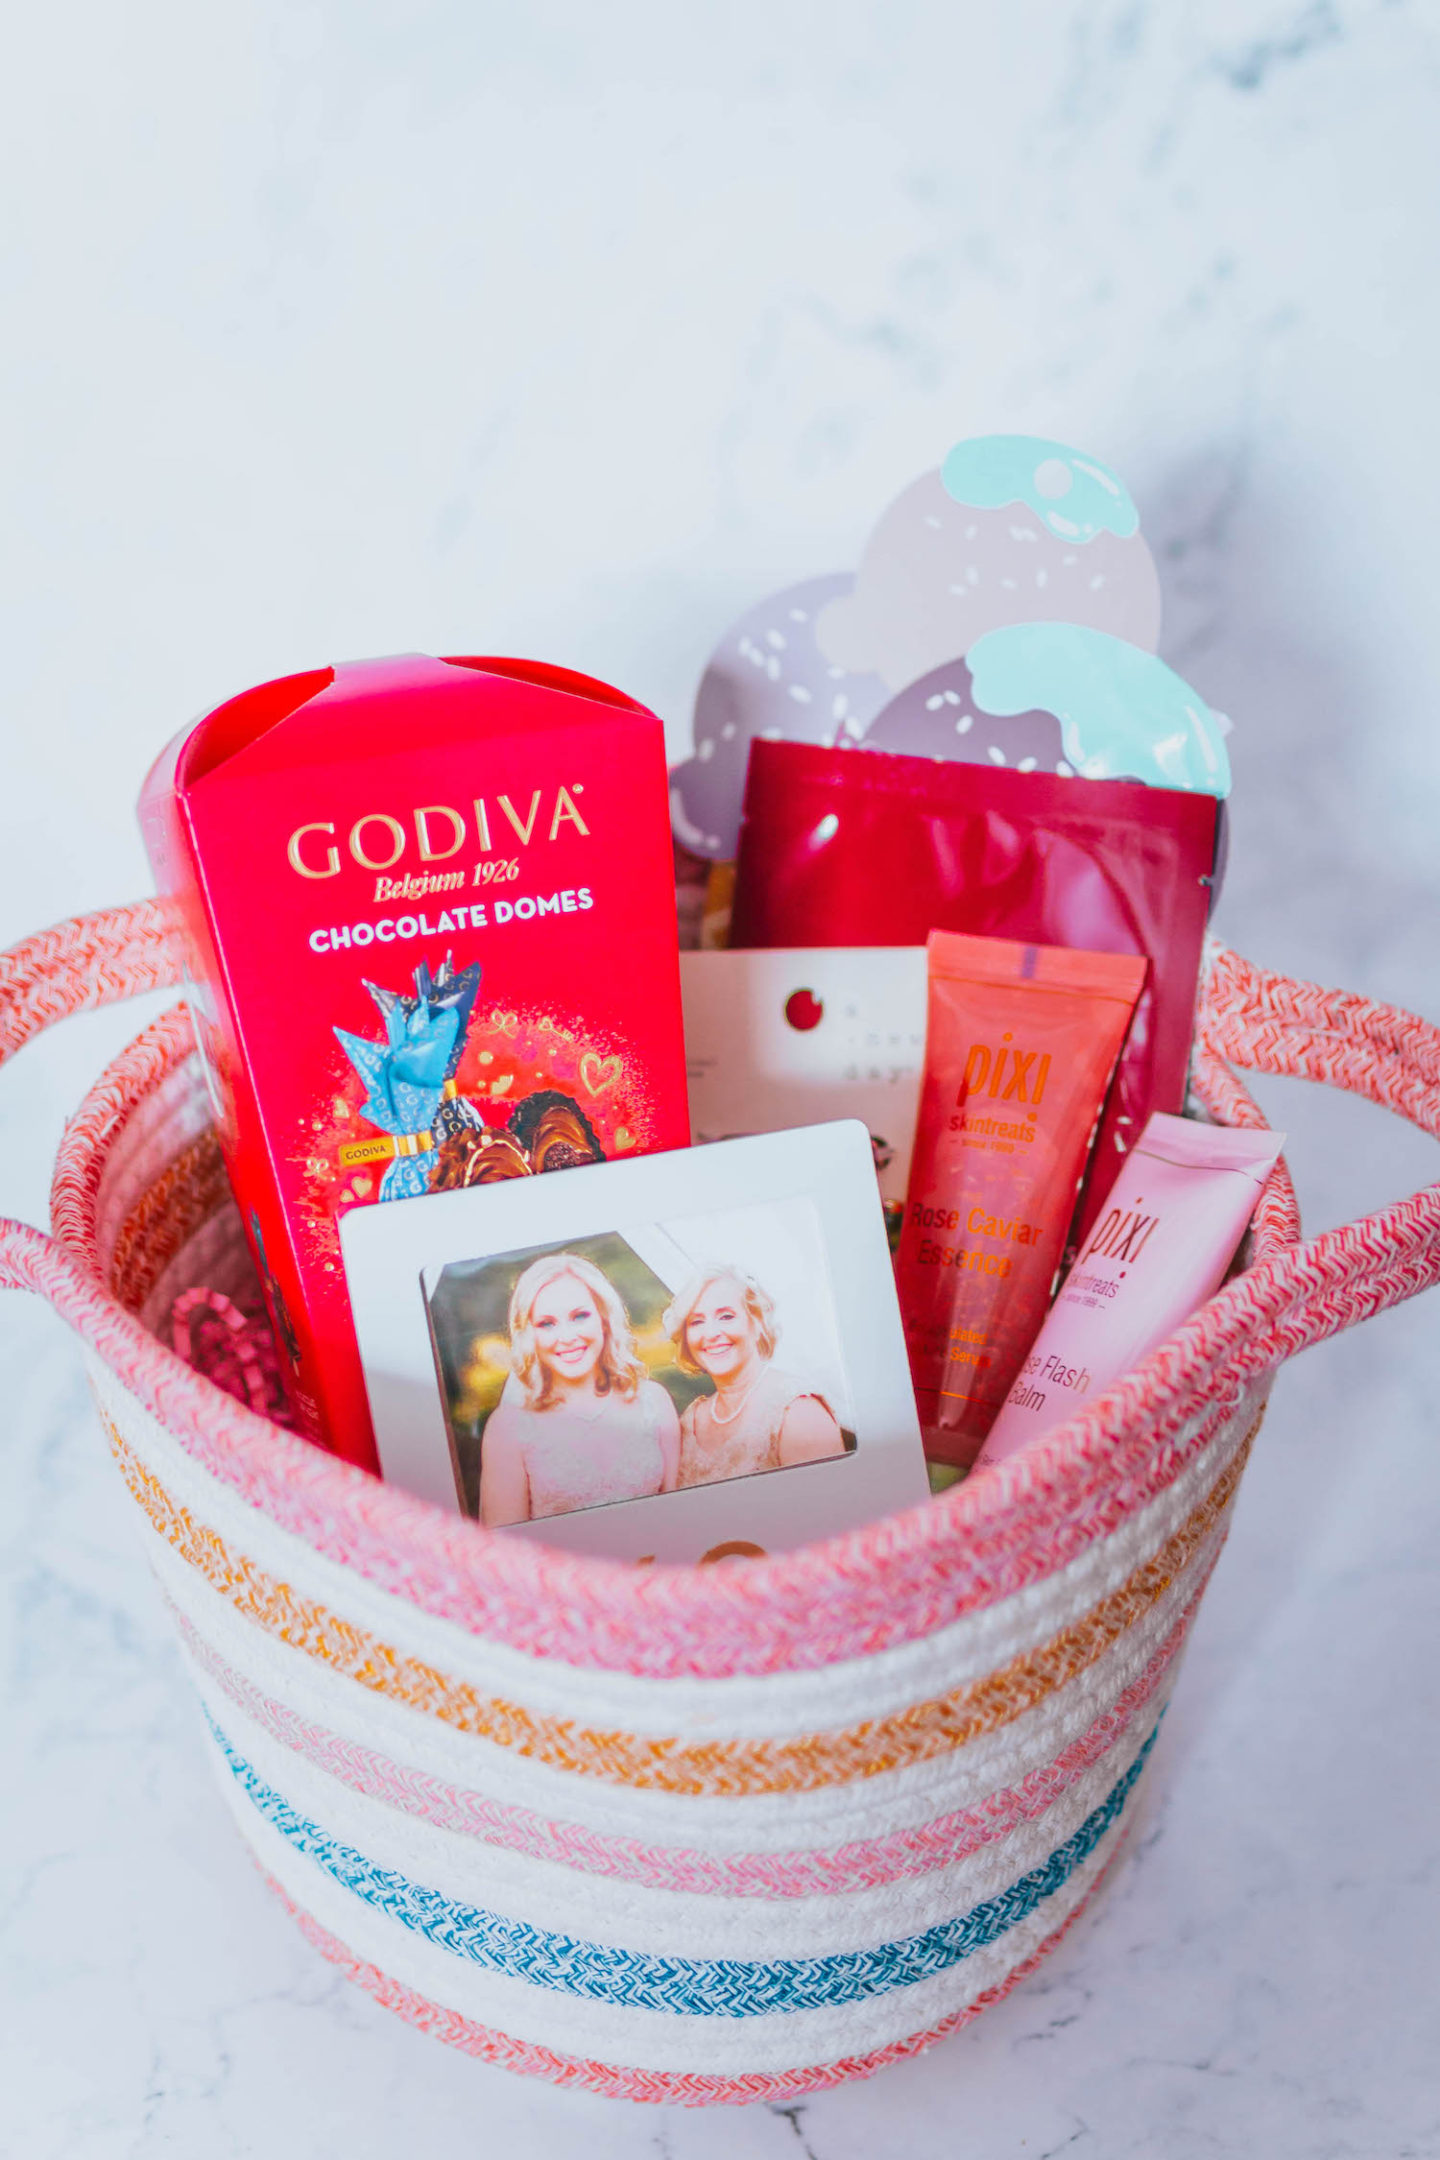 33 Incredible Gift Basket Idea for Mom Options She Will Absolutely Love